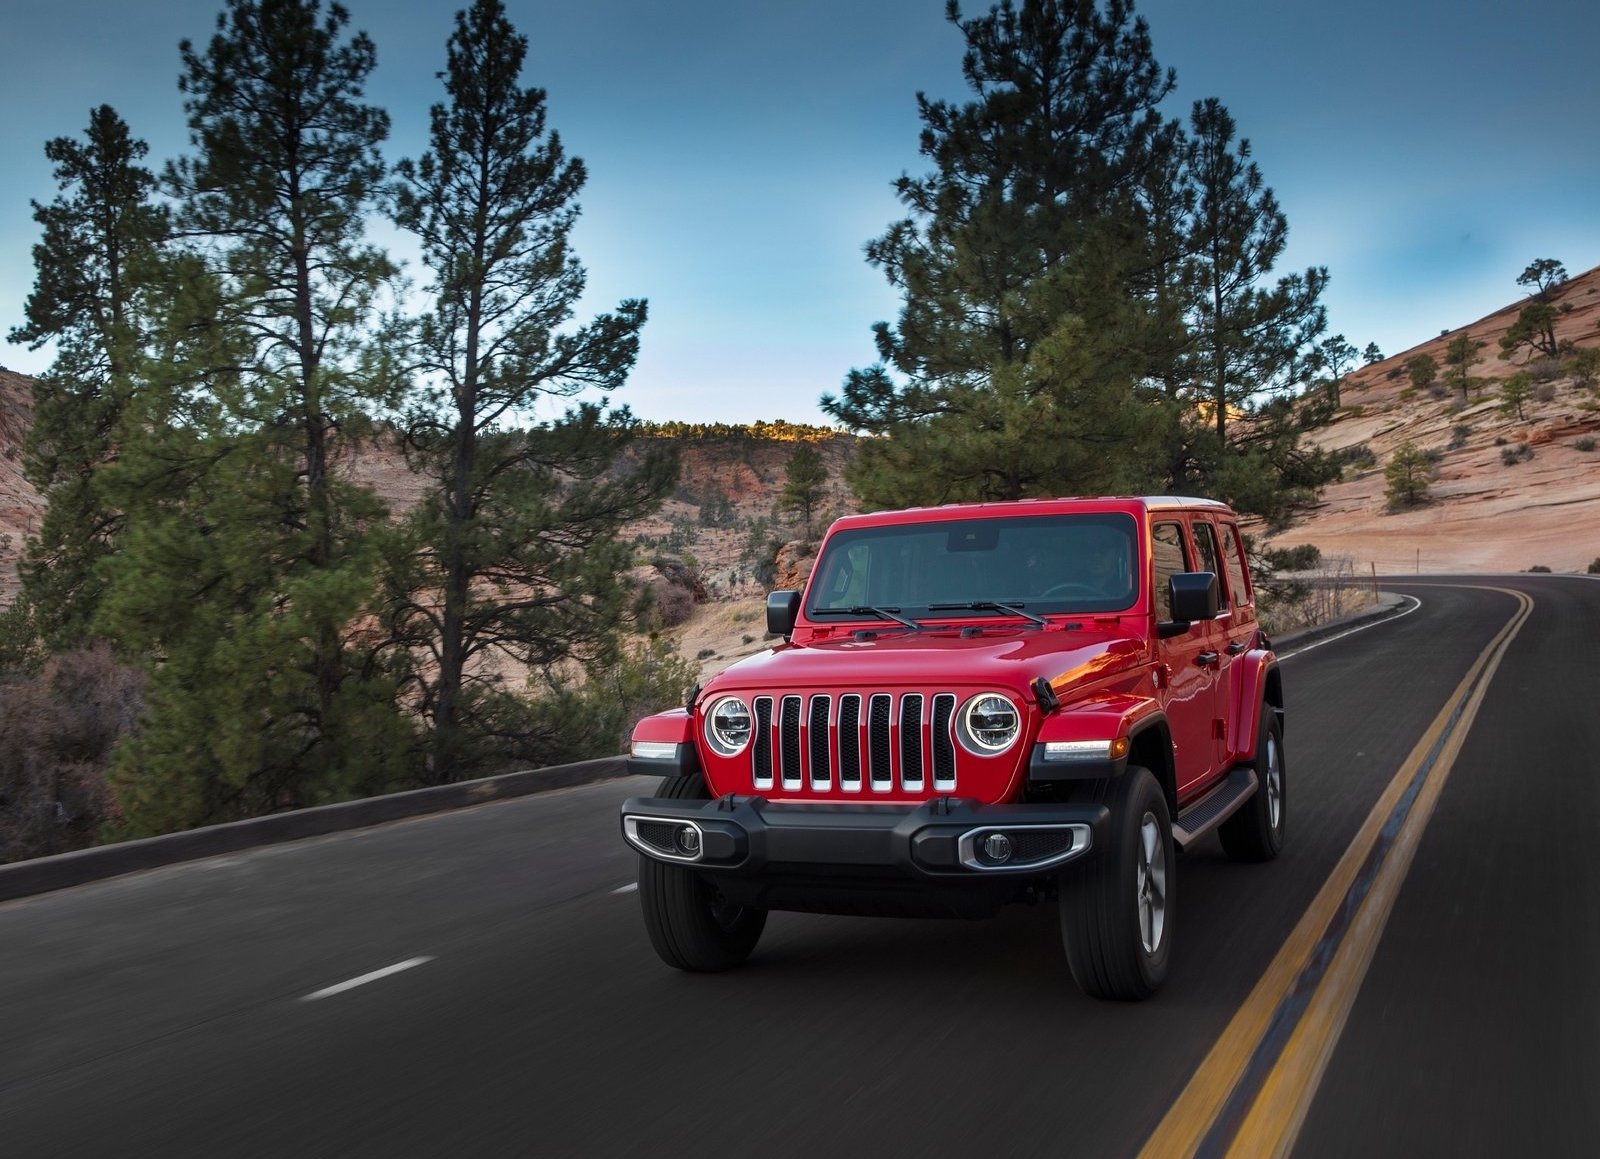 Jeep Wrangler Also Losing the Diesel Option: Report | The Drive